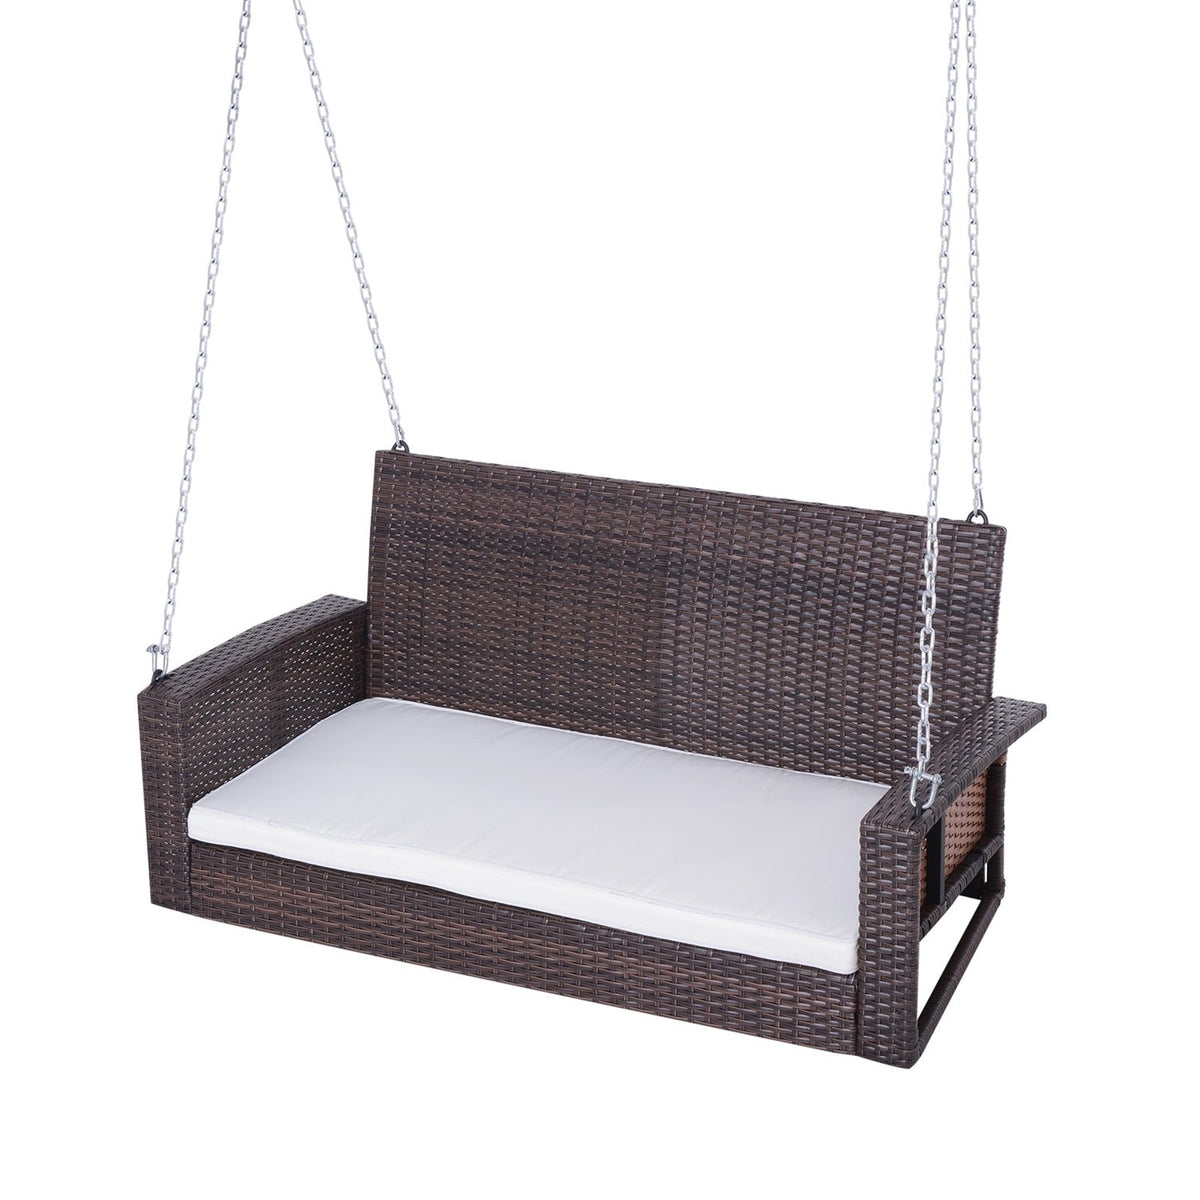 Espresso Wicker Porch Swing 7ft Hanging Chain with Cream Padded Cushion